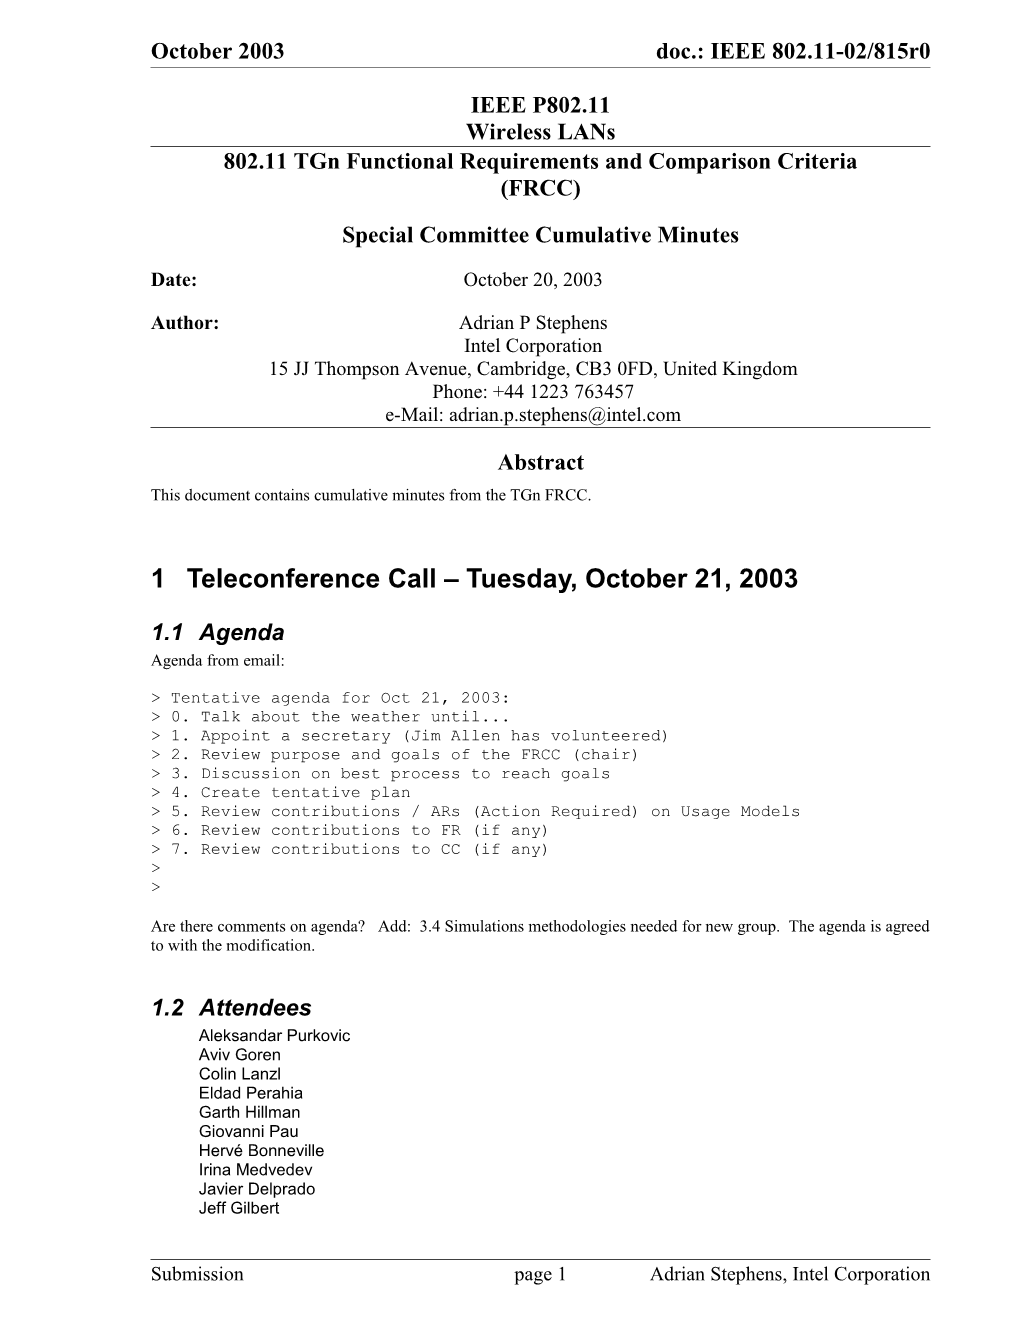 802.11 Tgn Functional Requirements and Comparison Criteria (FRCC)